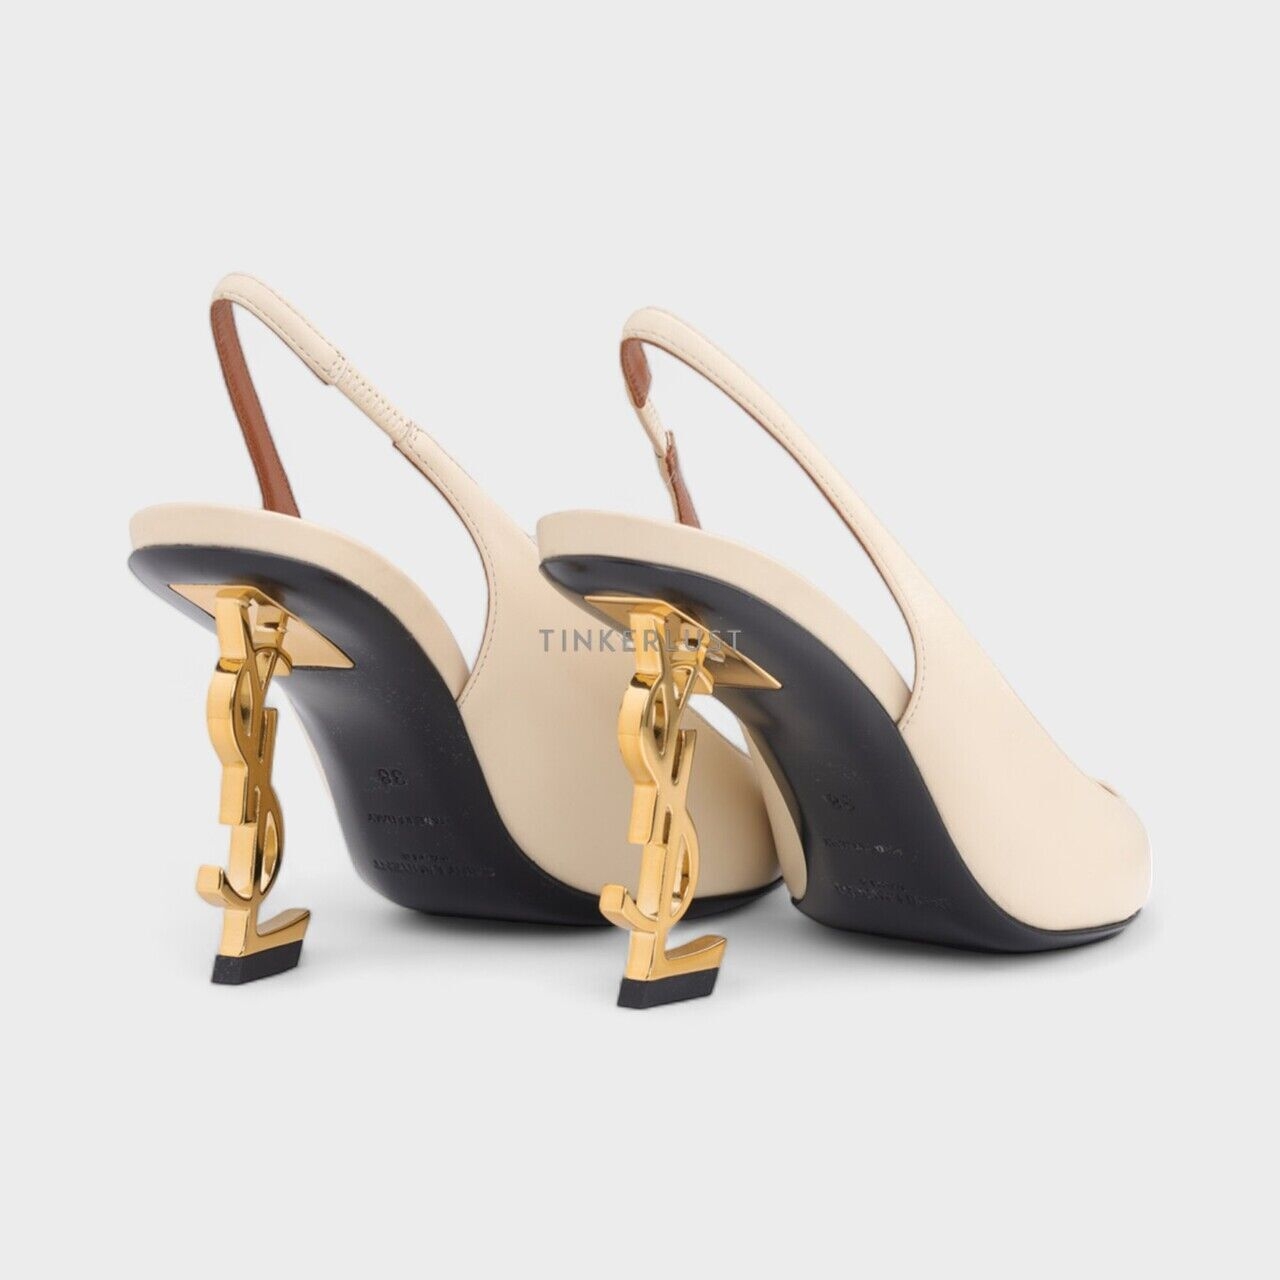 Saint Laurent Opyum Slingback Pump 85mm in Real Beige Smooth Leather with Gold Logo Heel